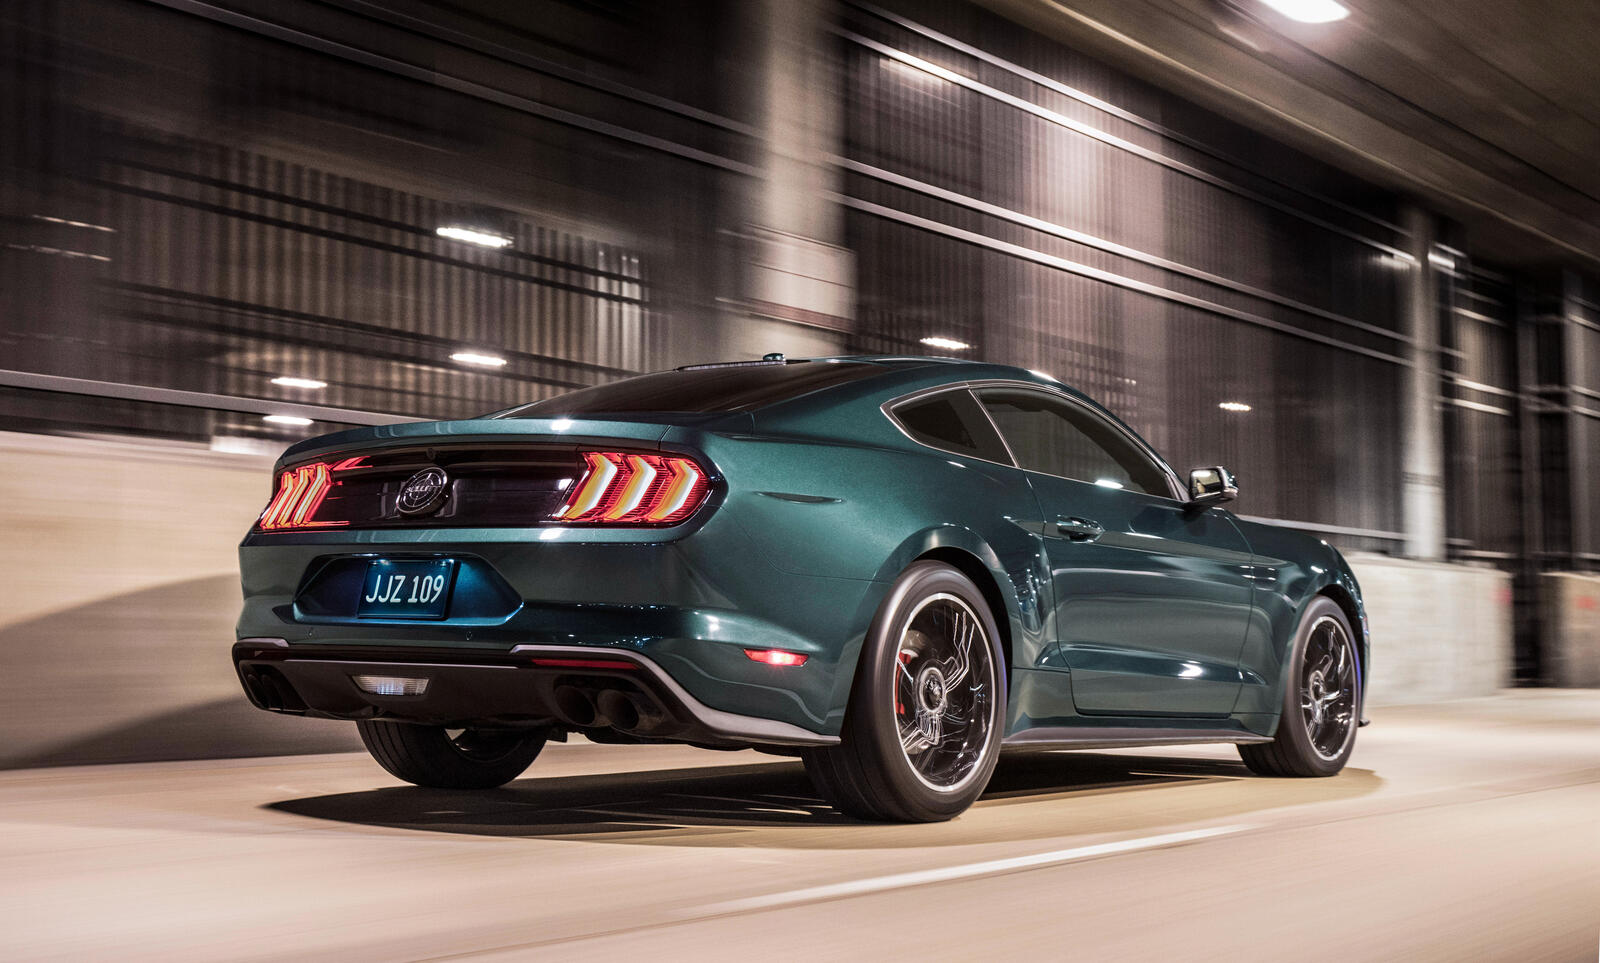 Wallpapers Ford Mustang Bullitt view from behind in move on the desktop